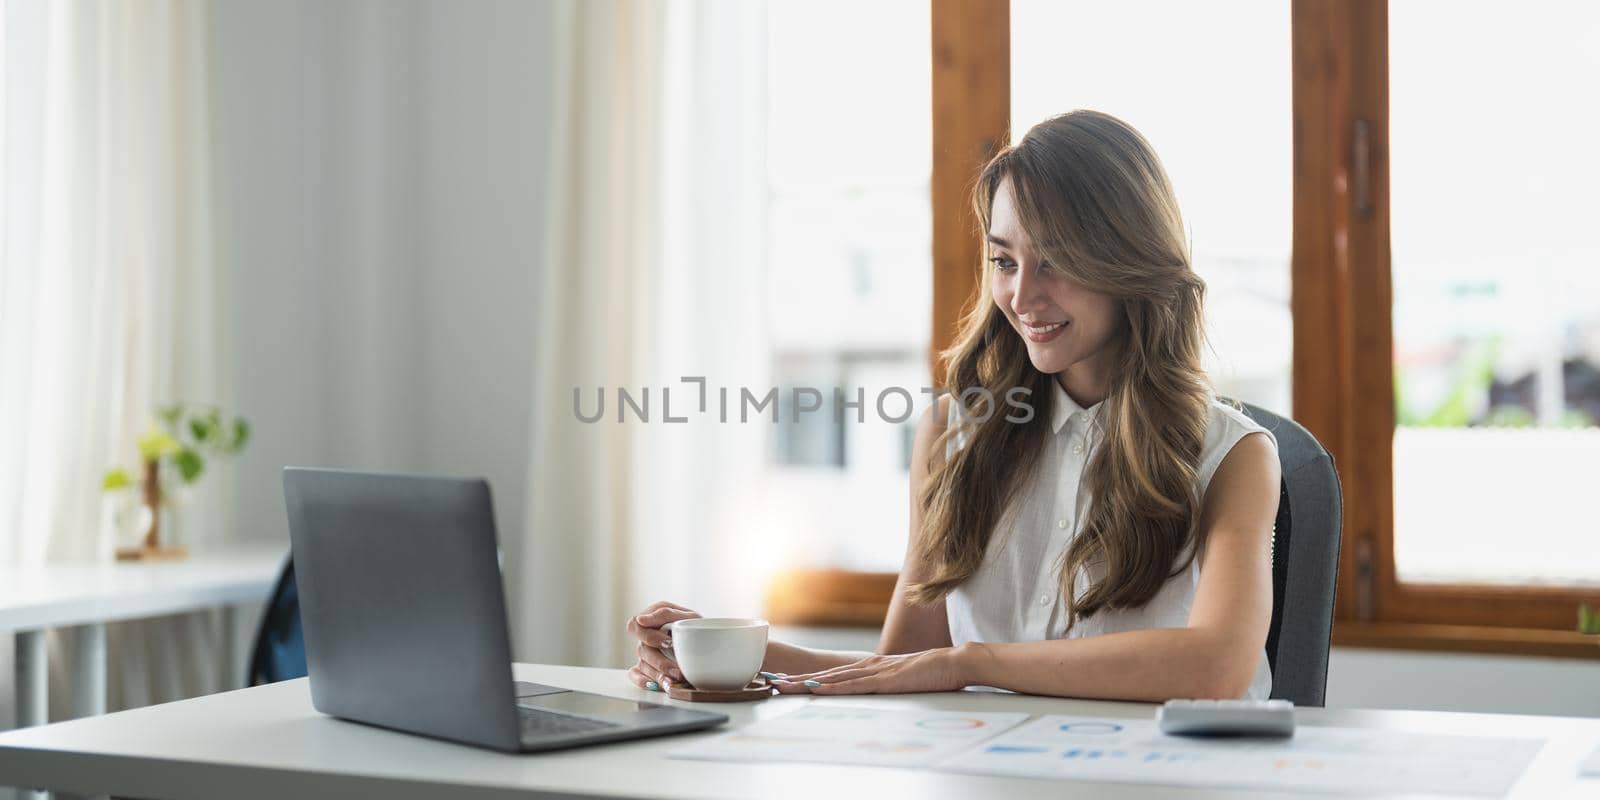 Happy asian woman sit at table busy in personal expenses management, use calculator calculate household utilities, pay bills through secure e-banking app on laptop. Finances, accounting concept.